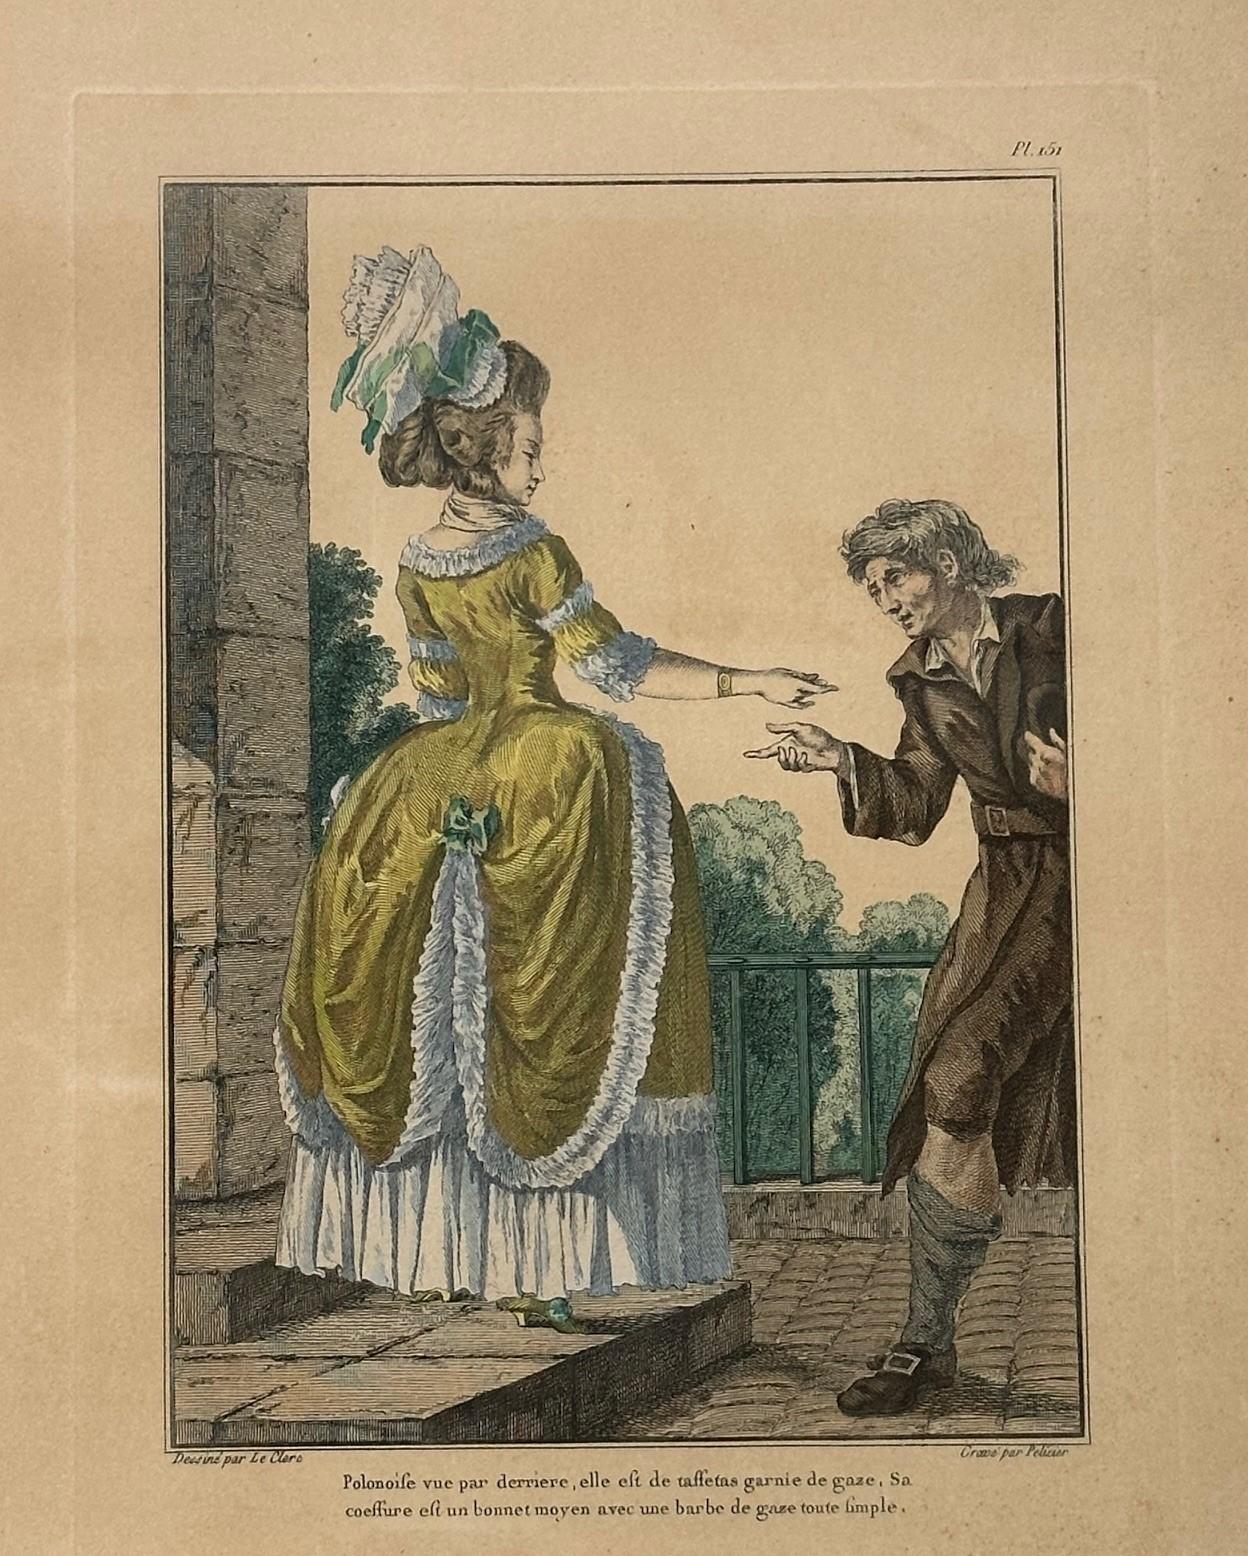 French Engraving Hand Colored Galerie des Modes Costumes Francais, 1779.

Rare antique French fashion print hand colored published first in Paris, 1779. The compositions were based on the most fashionable garments and hairstyles of the period. The